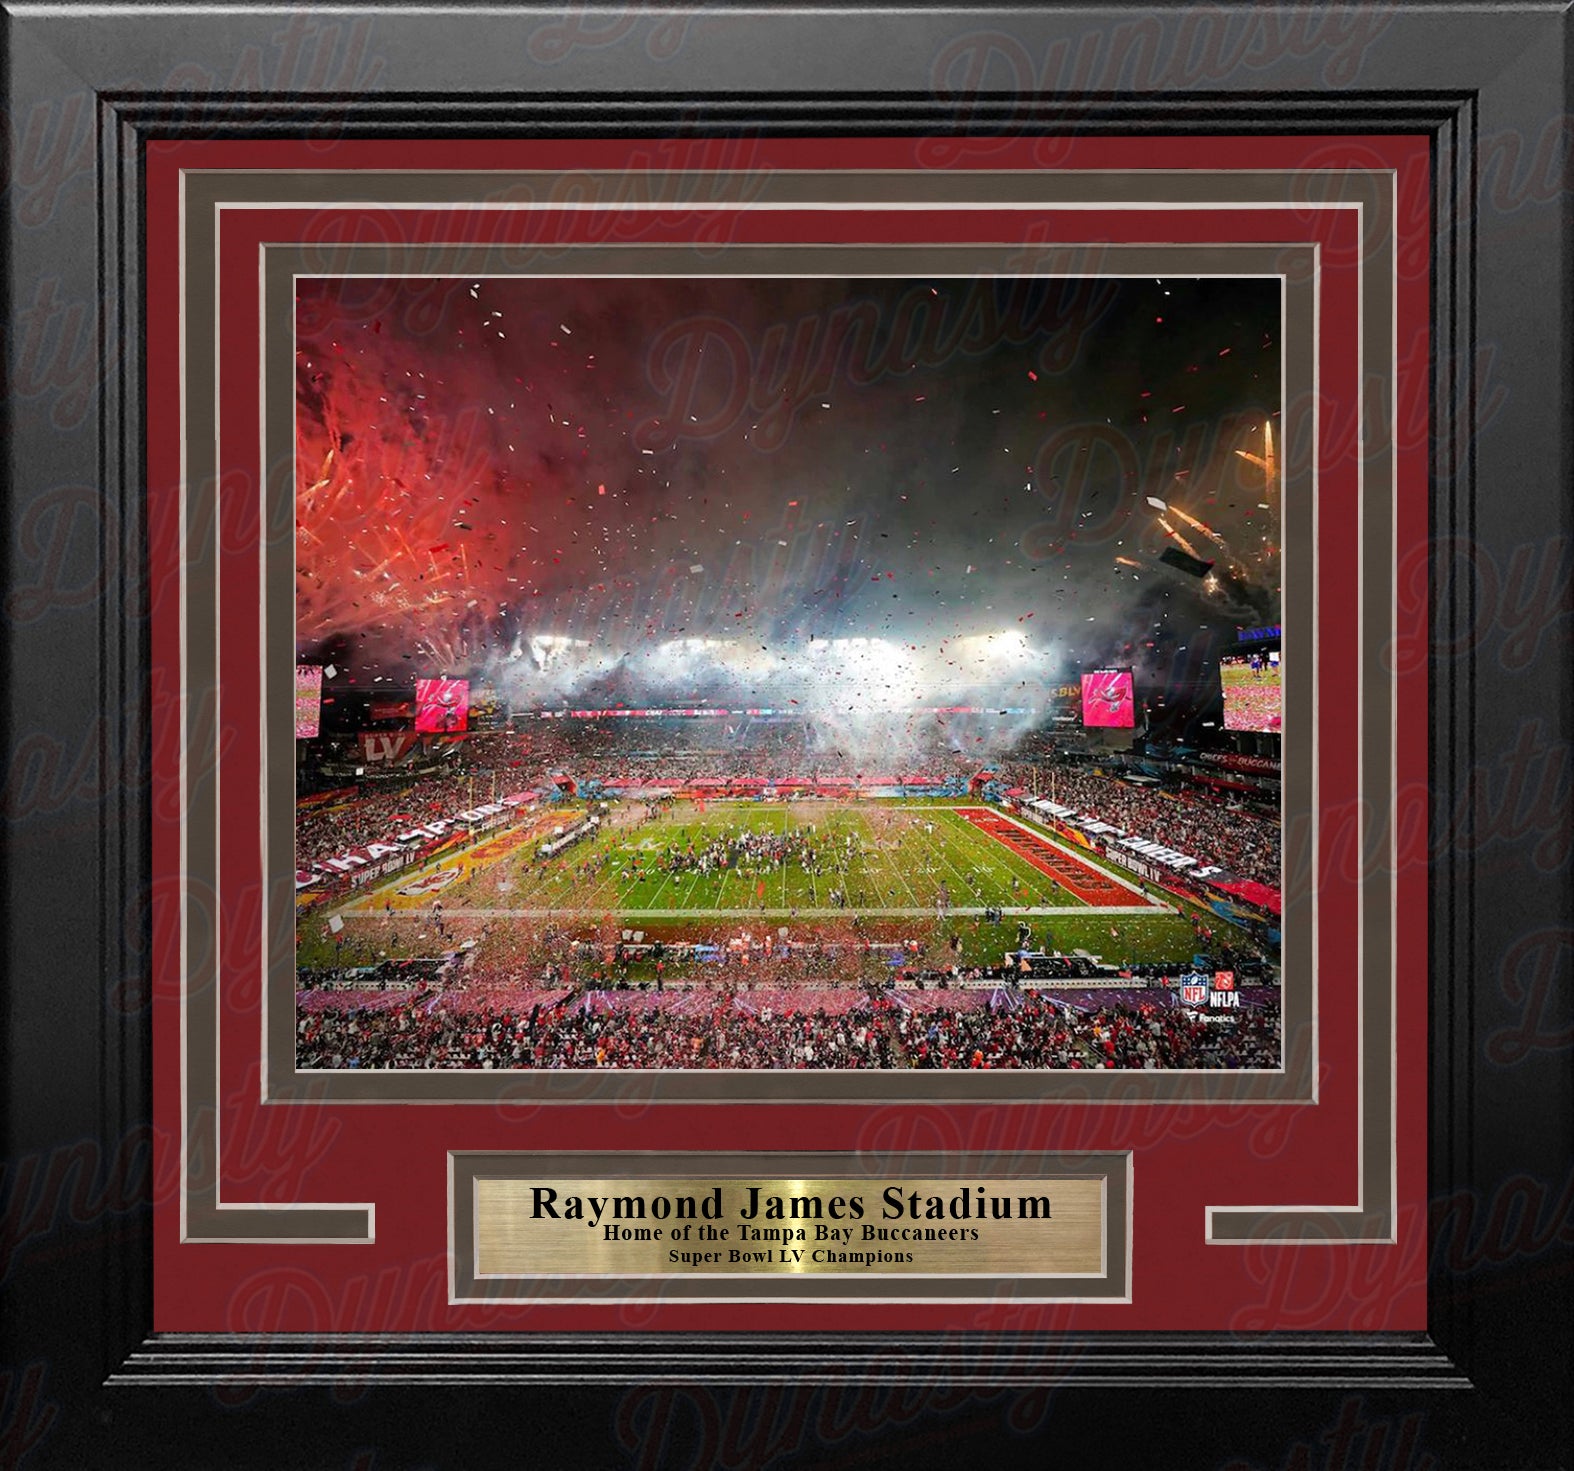 NFL Super Bowl LV Champions: Tampa Bay Buccaneers Official